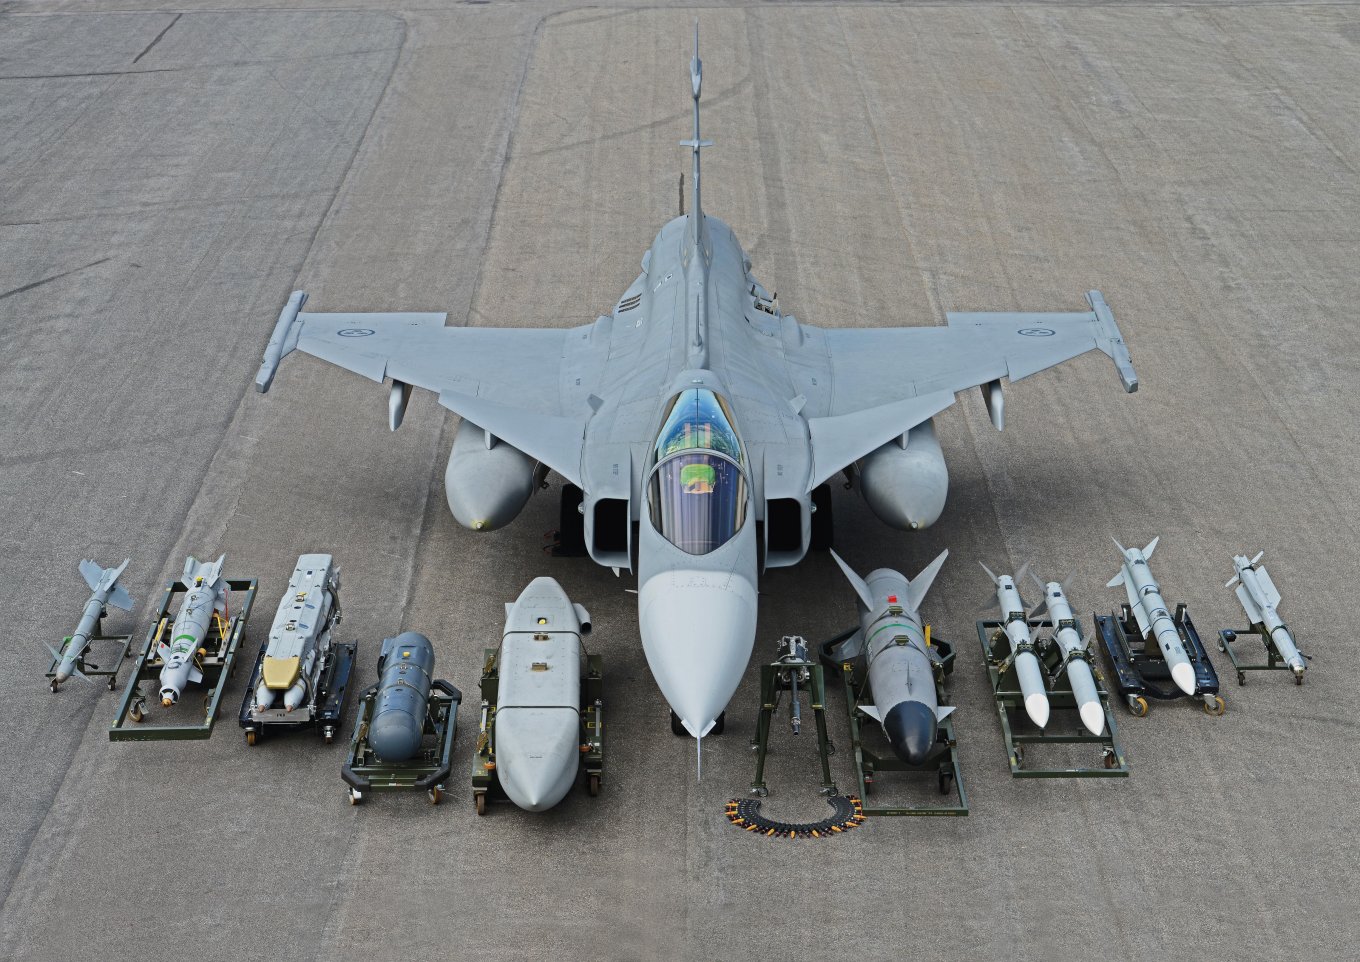 Weapons a JAS 39 Gripen can carry and use